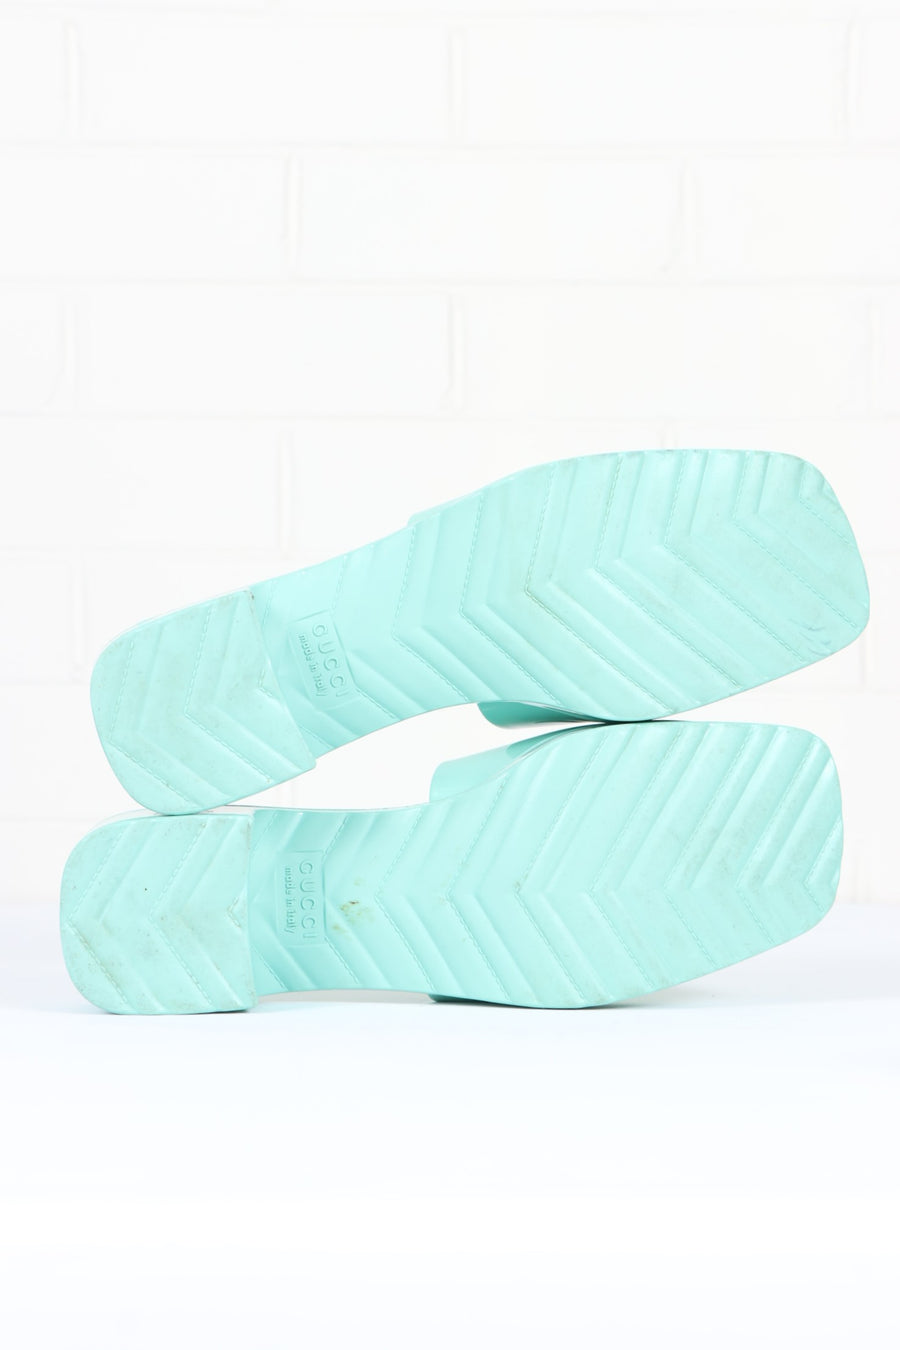 REPLICA Gucci 'Water Green' Turquoise Rubber Slide Sandals (41)